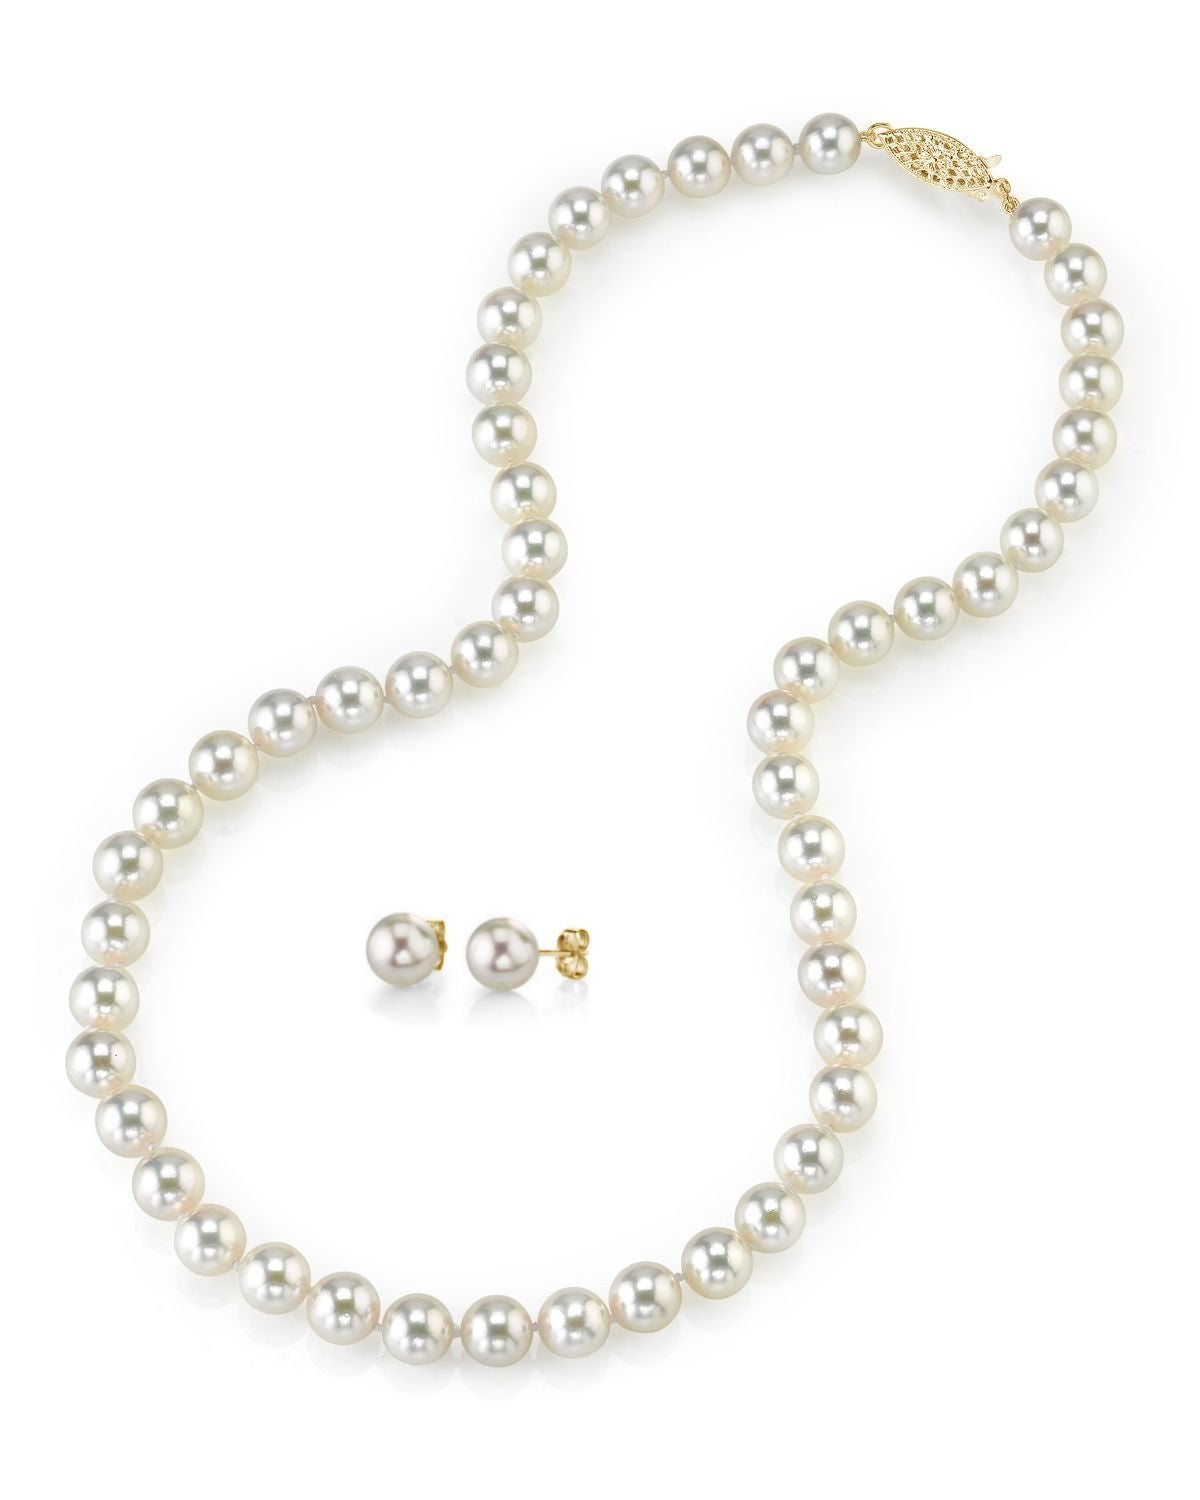 6.5-7.0mm Japanese Akoya Pearl Necklace & Earrings - Secondary Image